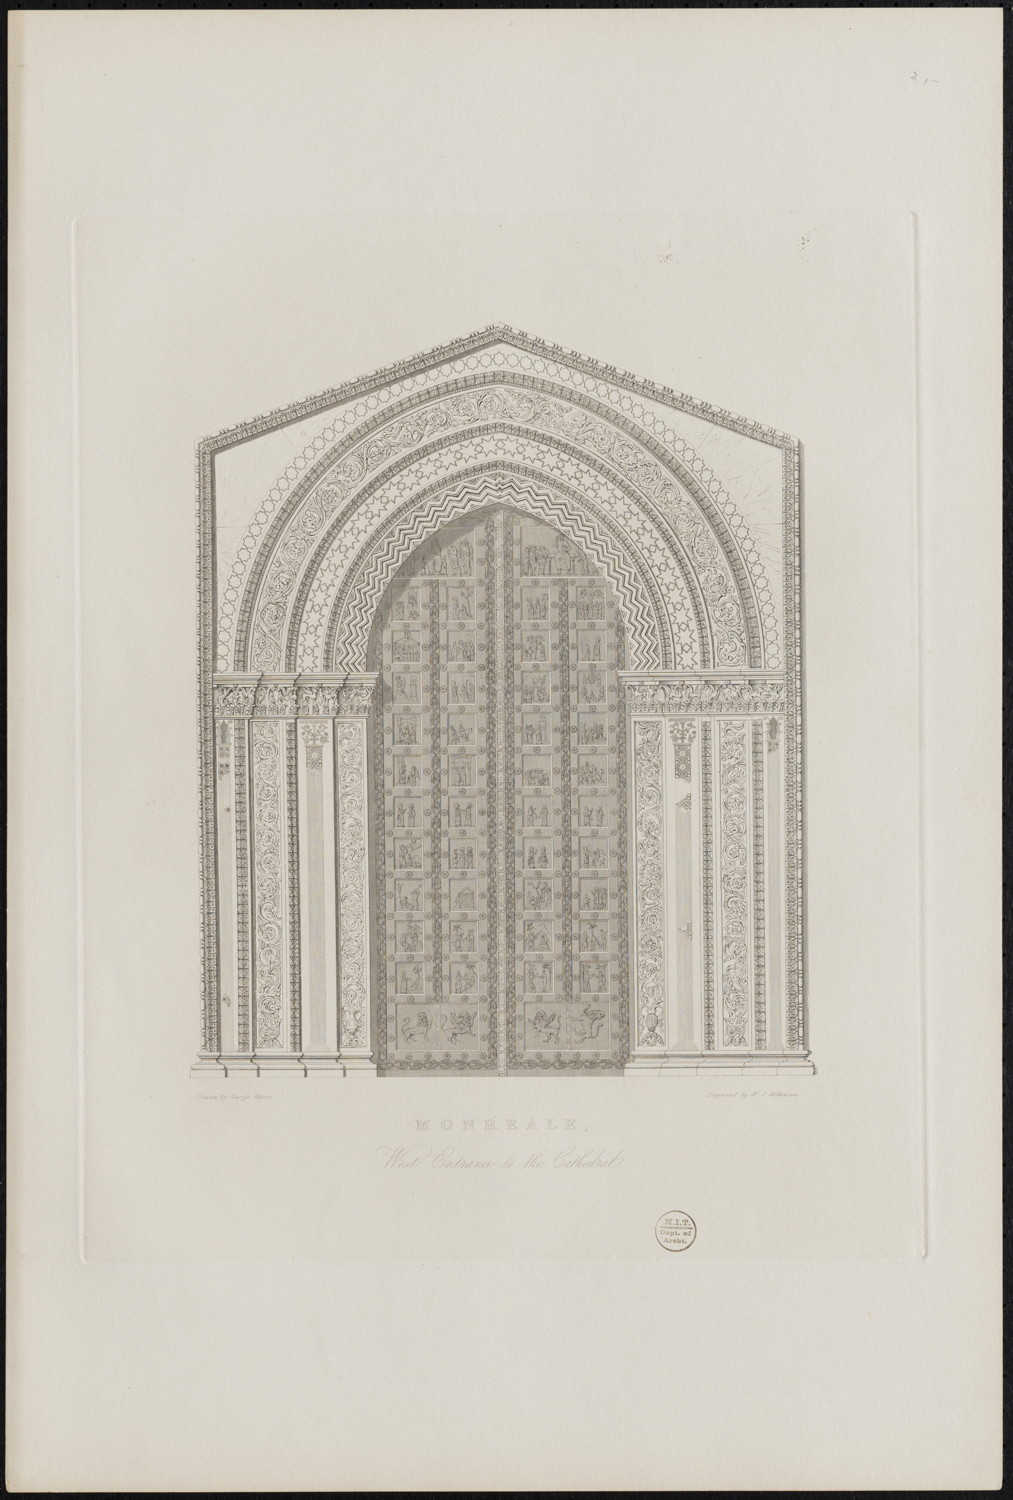 Lithograph of the west entrance